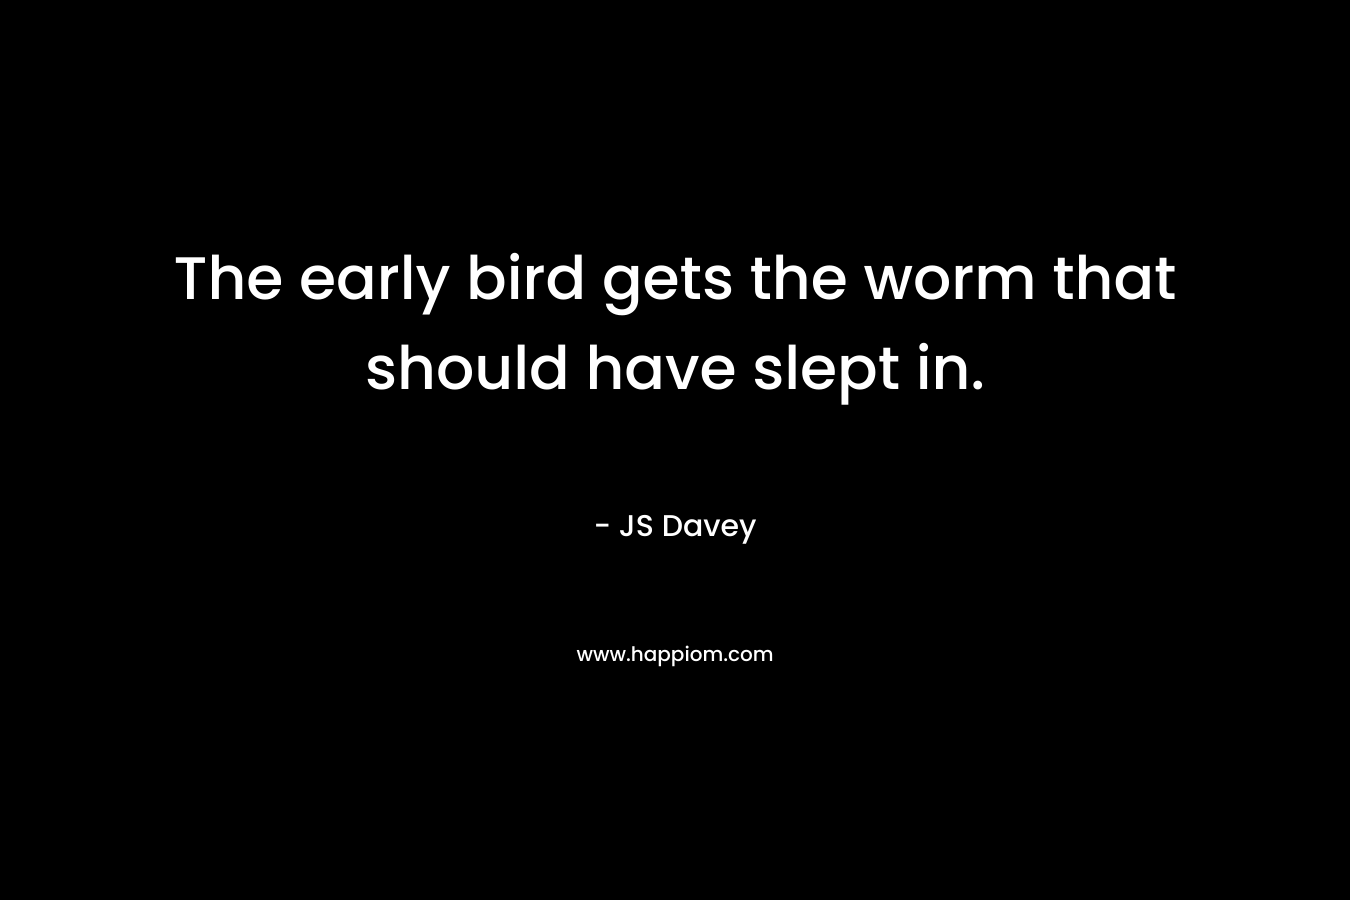 The early bird gets the worm that should have slept in.